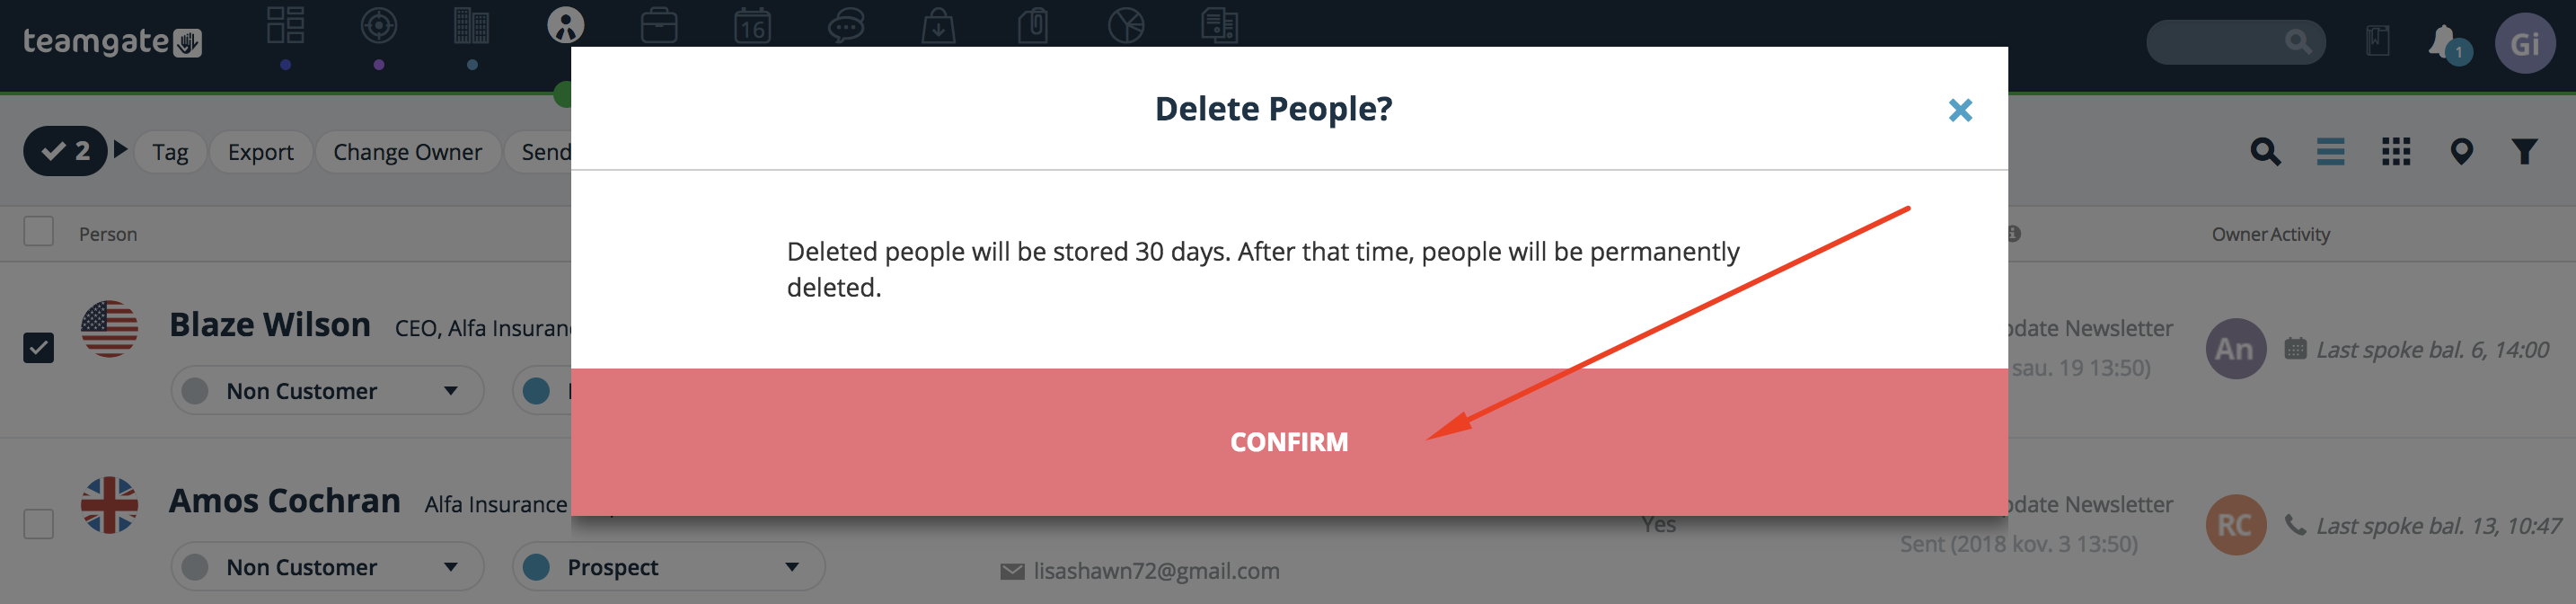 delete-people-from-the-list-confirm-Teamgate.png